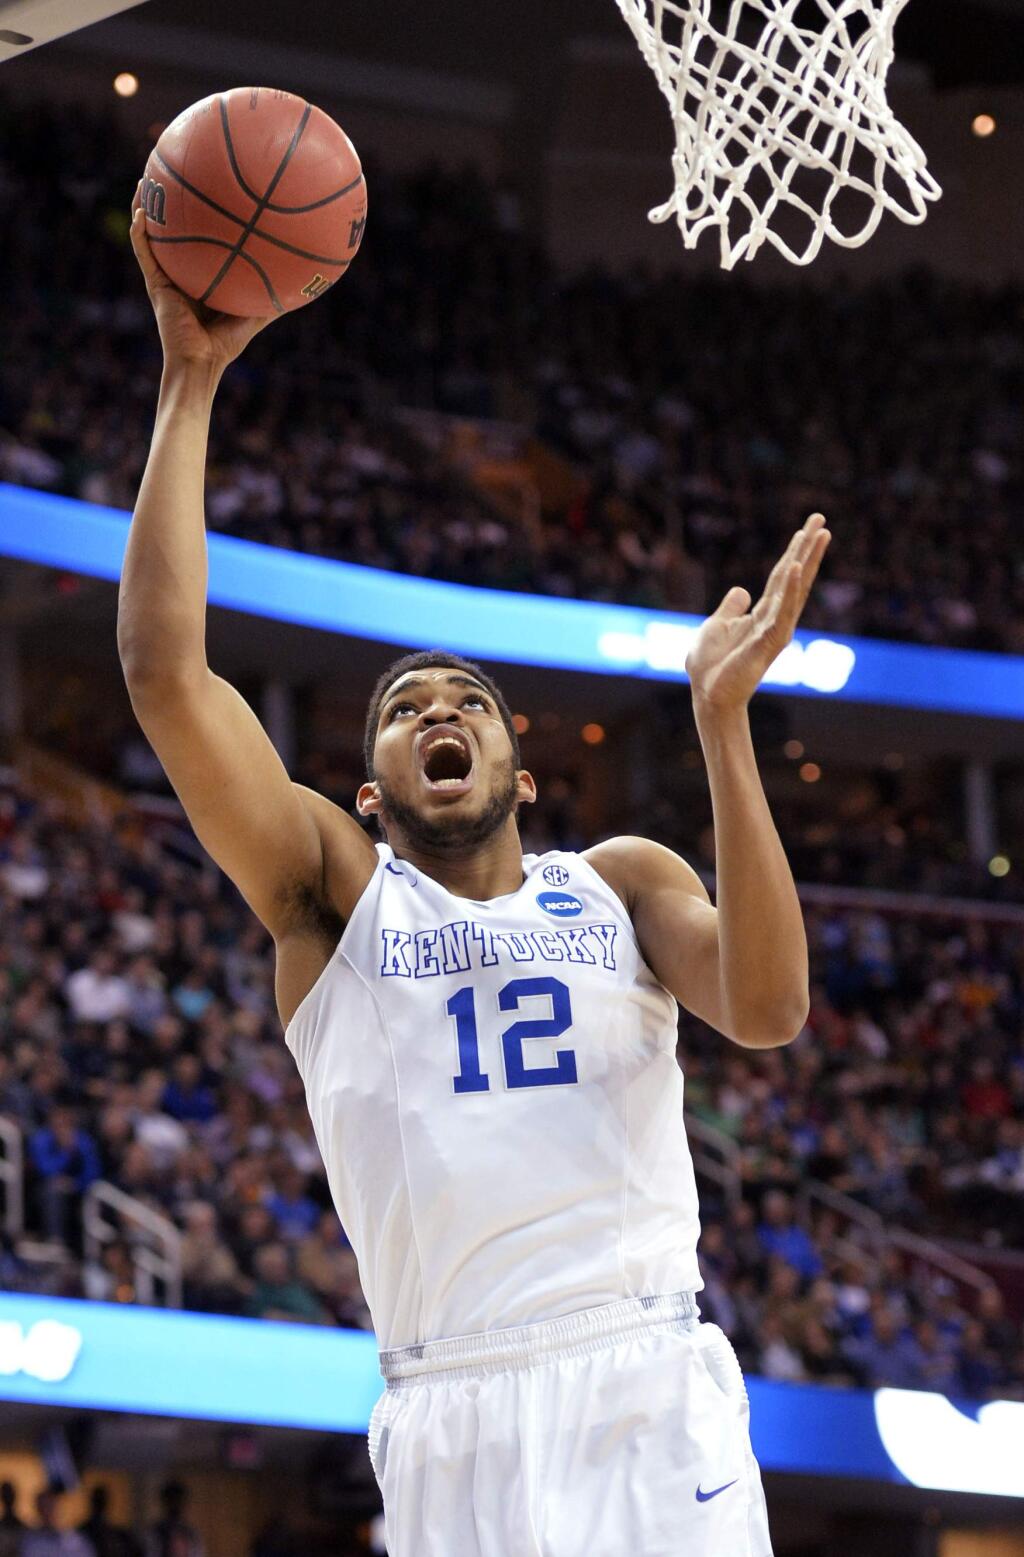 Kentucky's Karl-Anthony Towns shoots against Notre Dame during the first half of a college basketball game in the NCAA men's tournament regional finals, Saturday, March 28, 2015, in Cleveland. (AP Photo/David Richard)